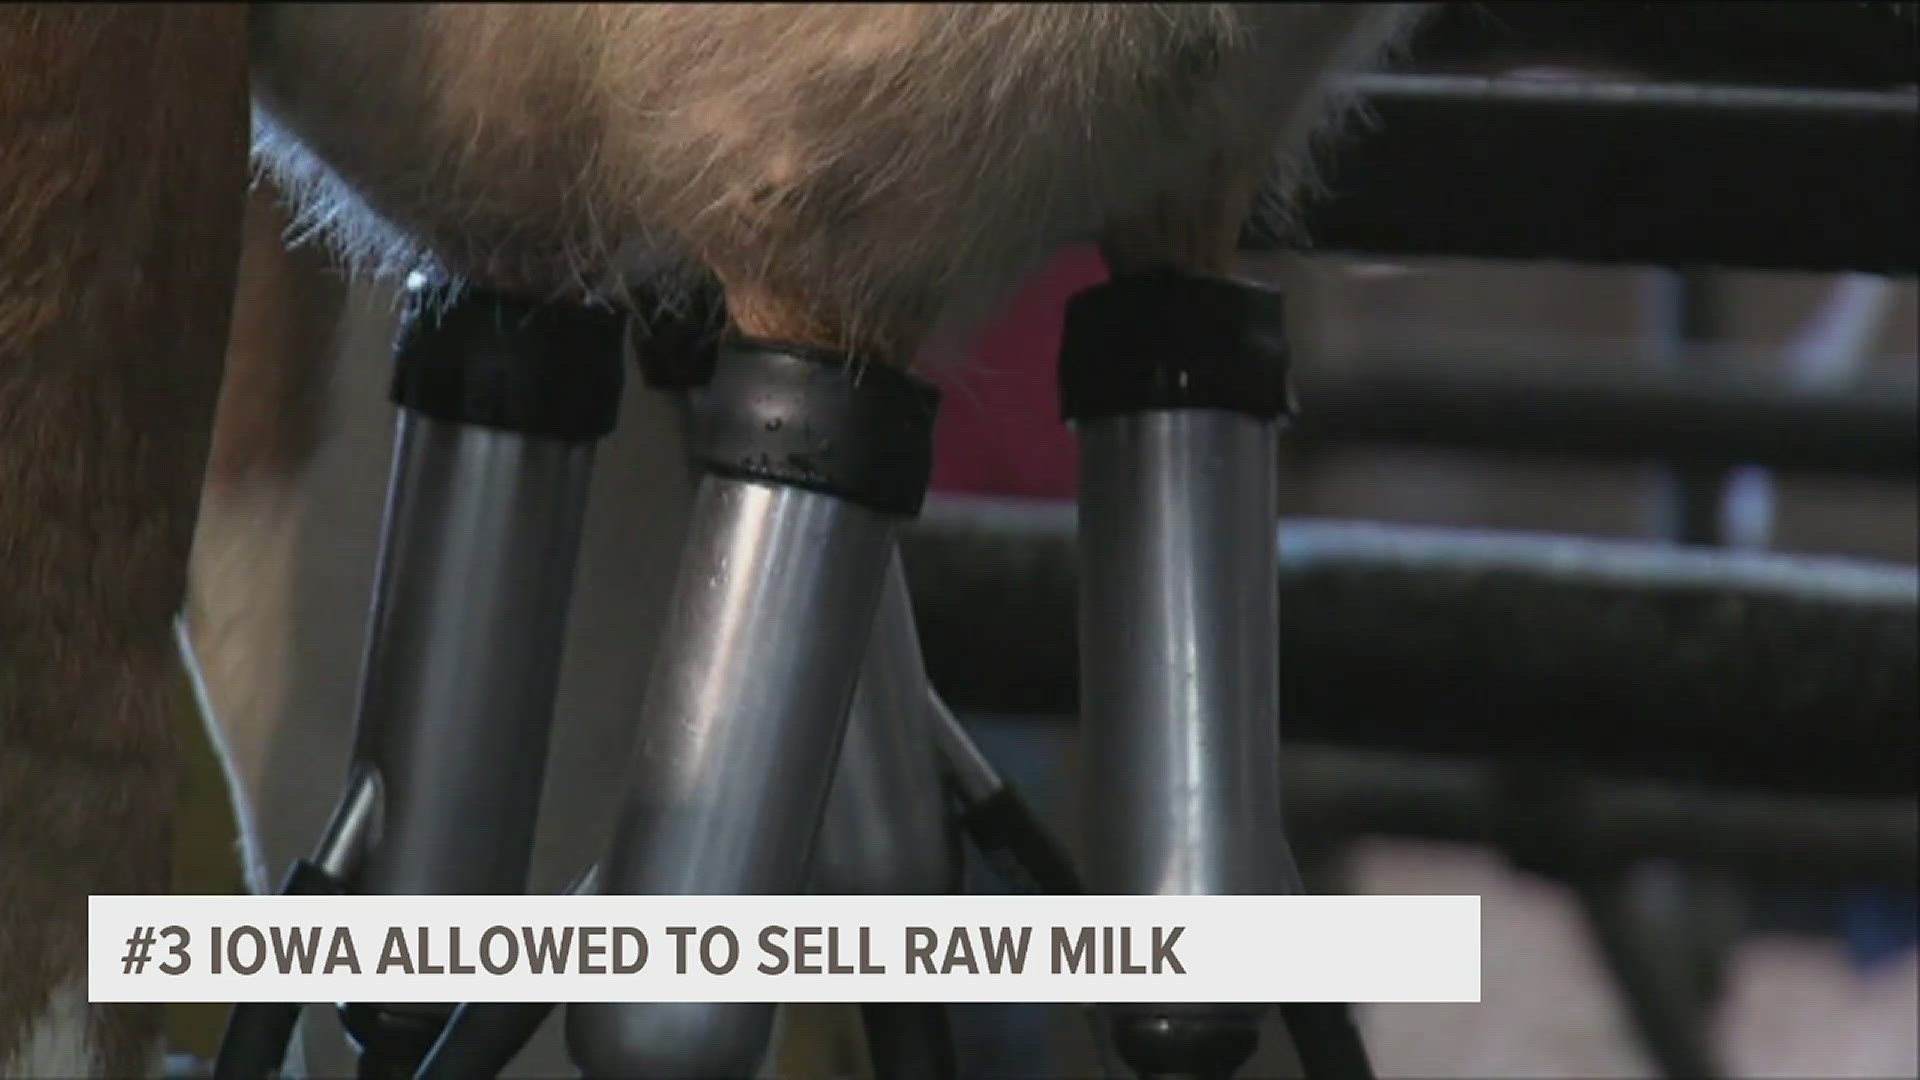 The pasteurizing process is used to ensure the milk is safe to eat. The unpasteurized milk will now have a warning label to make it clear to consumers.